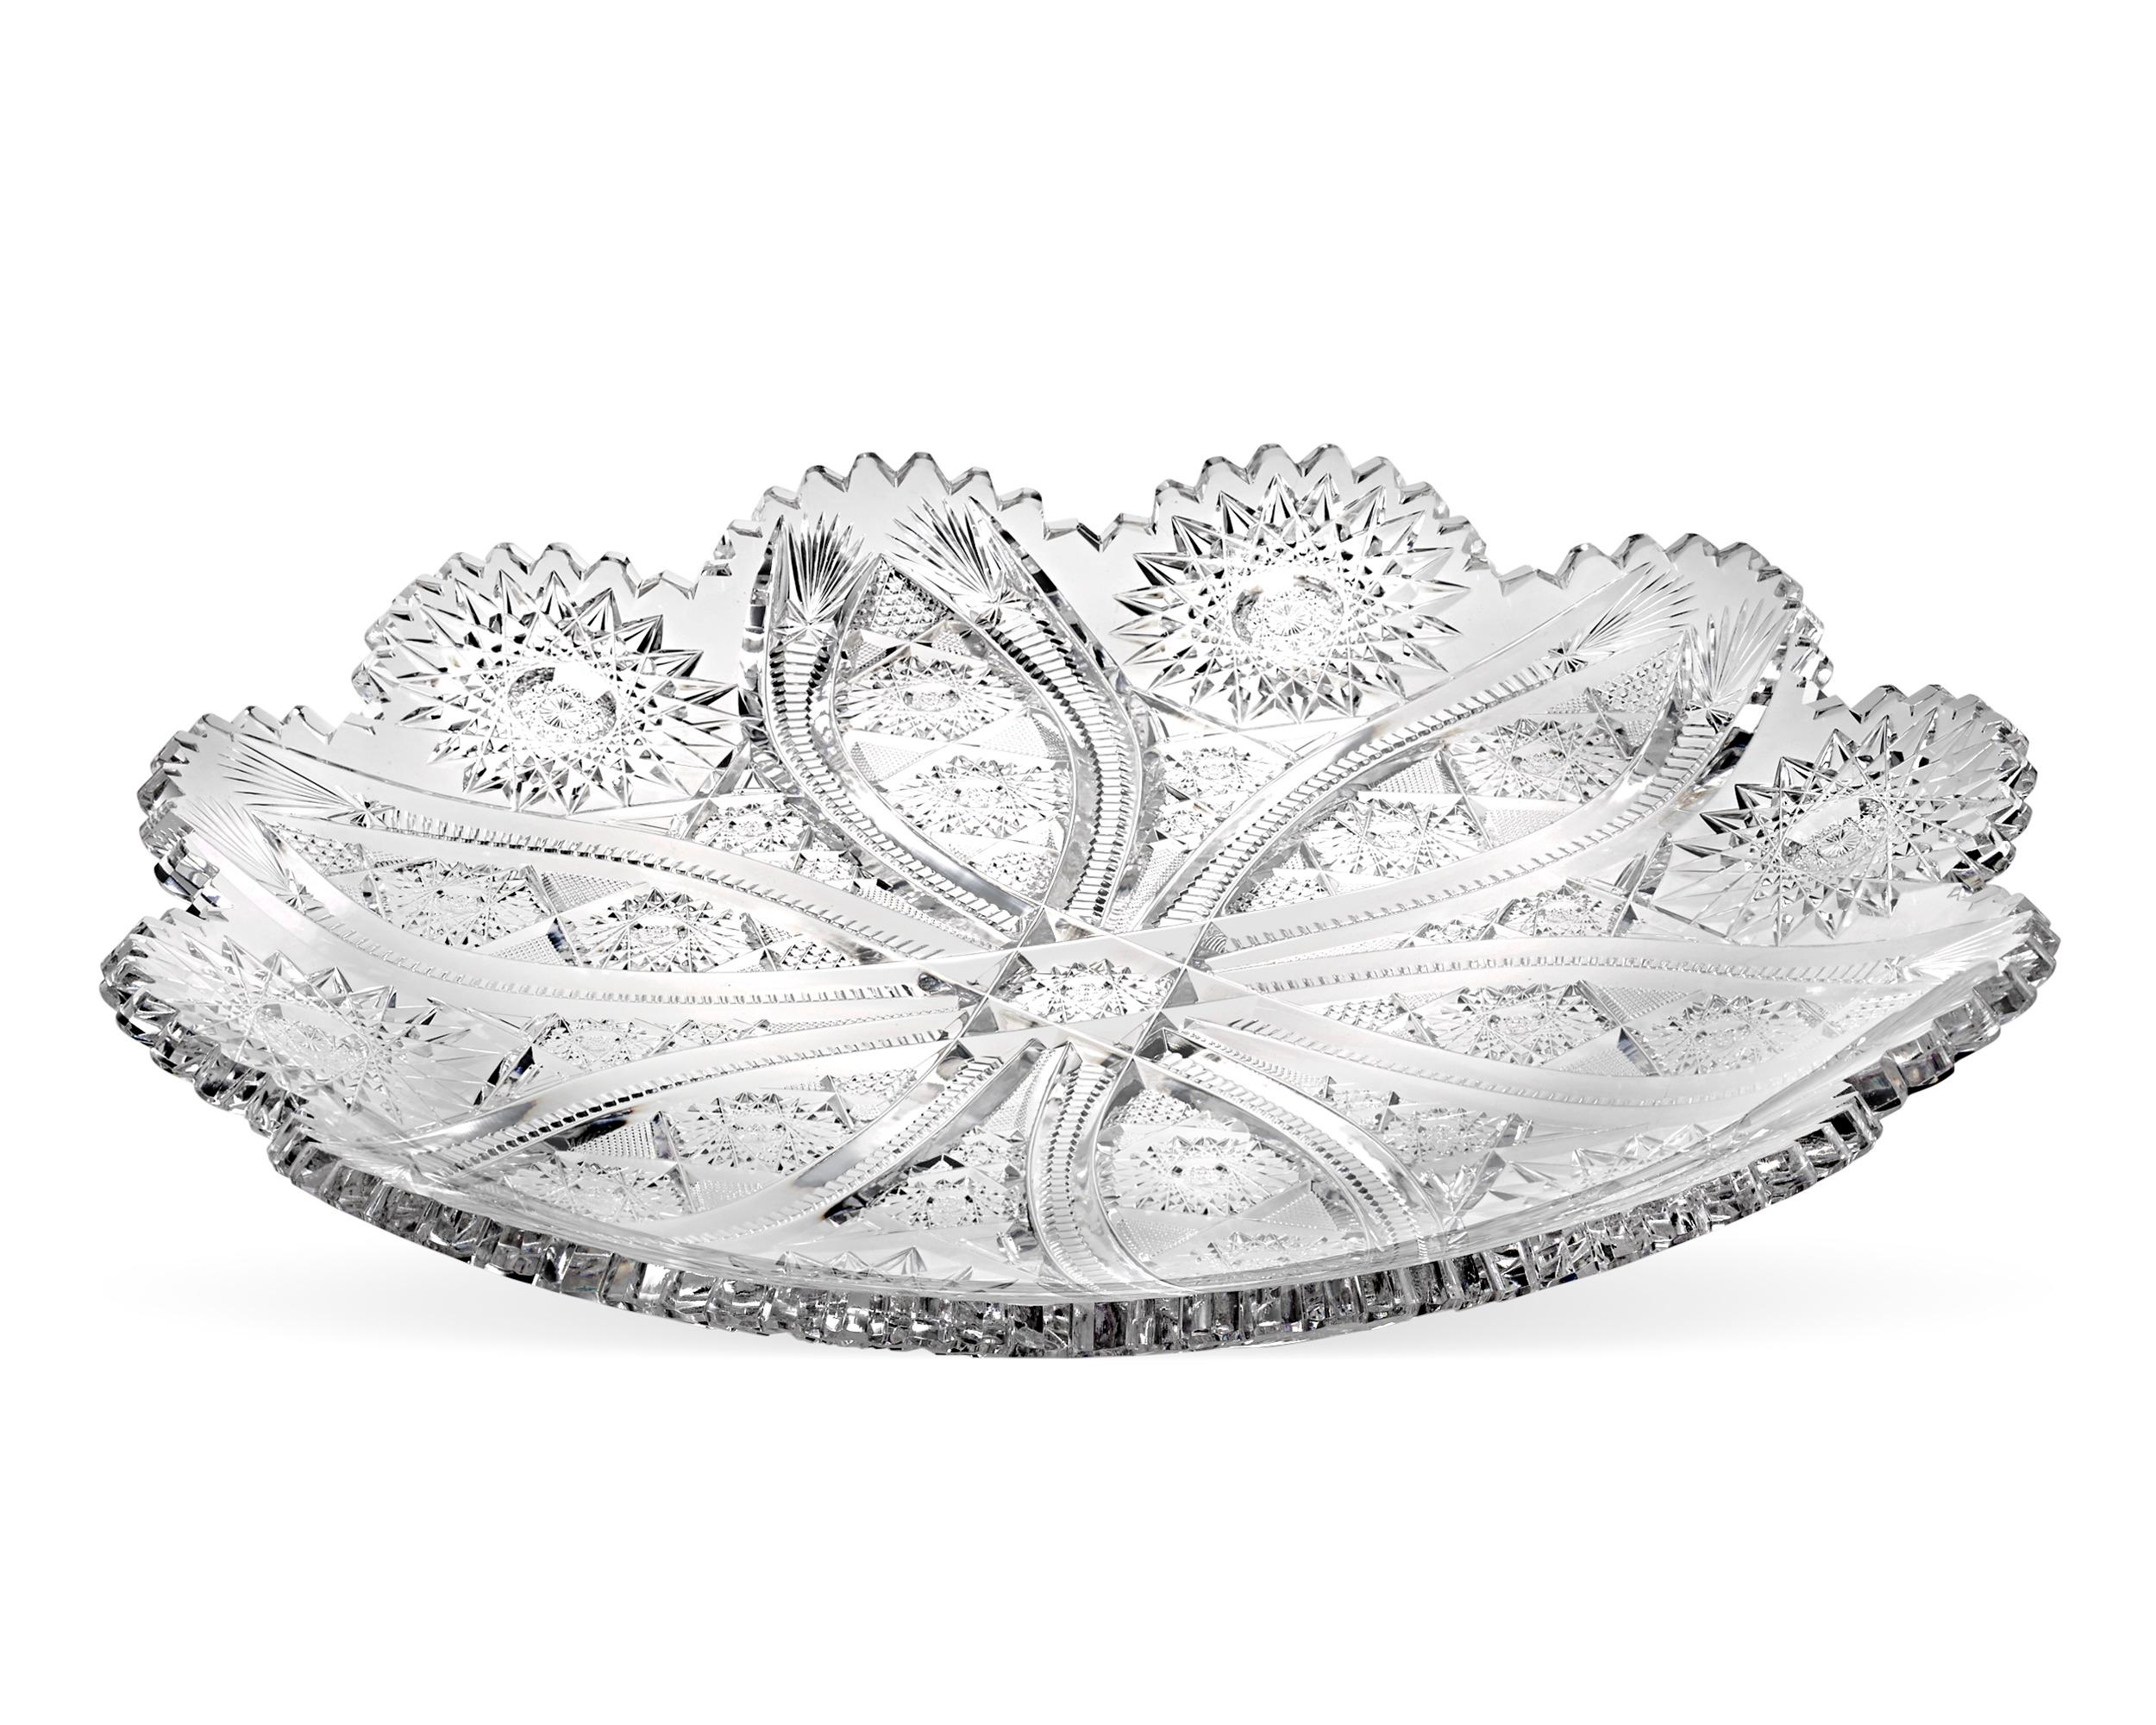 The Bangor pattern adorns this American Brilliant Period cut glass bowl by the Jewel Cut Glass Company. Cut with a high level of precision, the pattern features a richly detailed hobnail, vesica and prism motif so striking and complex in its